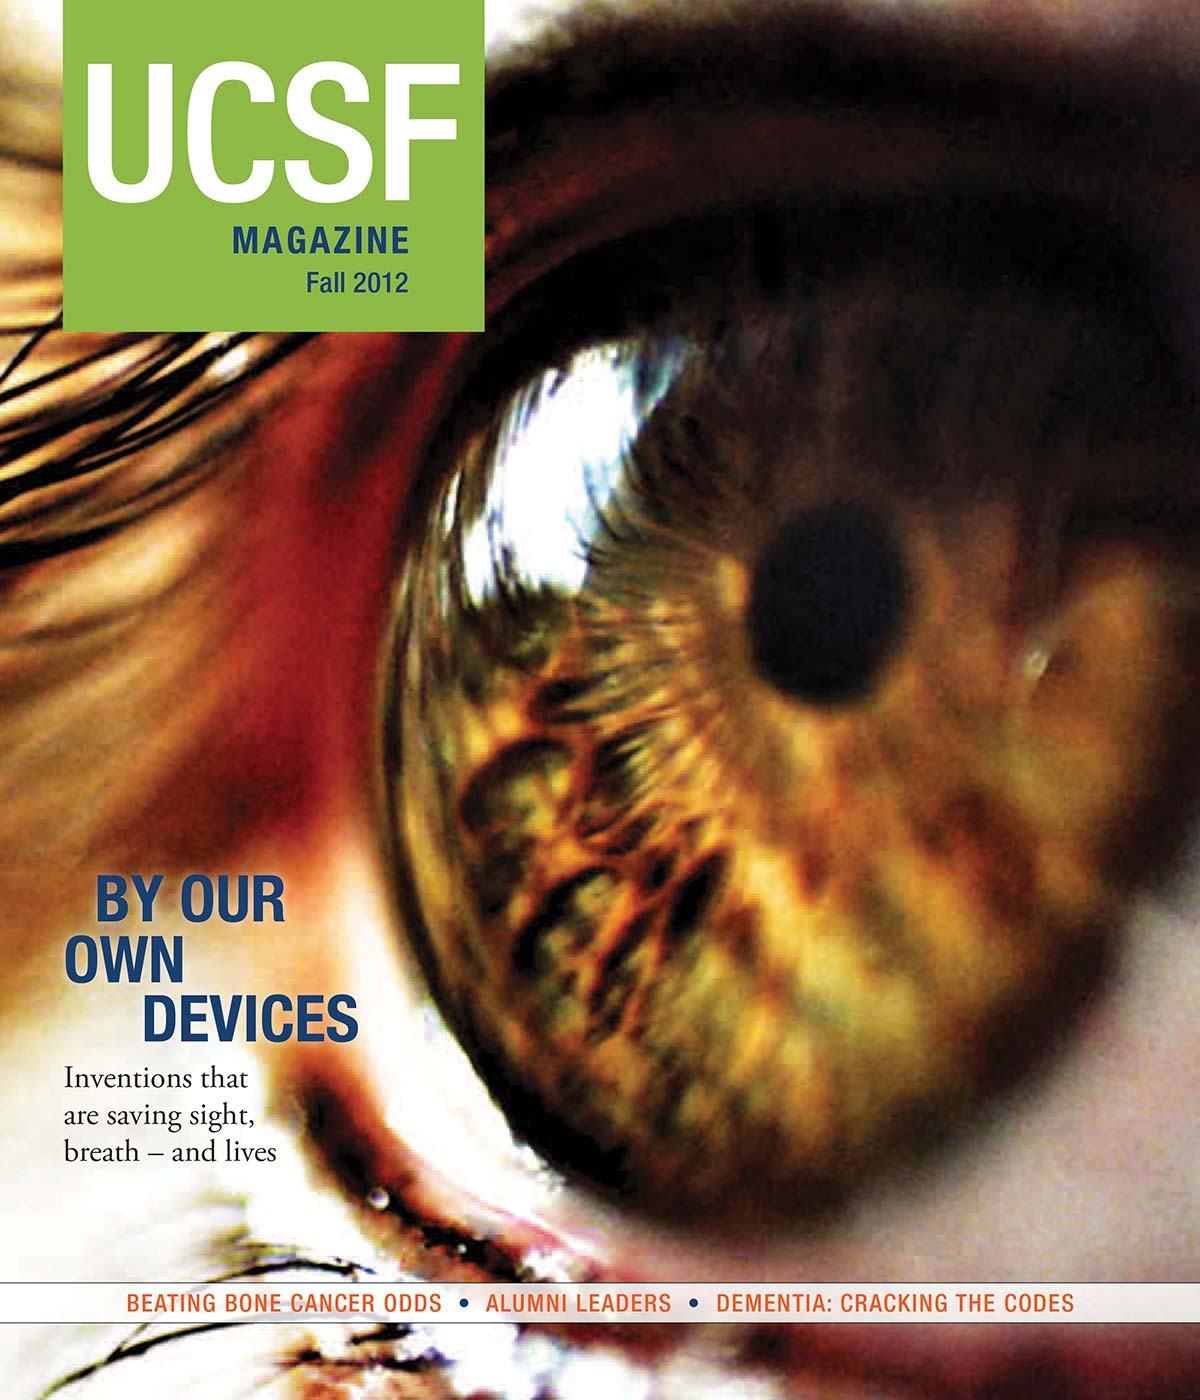 Cover of UCSF Magazine: left corner reads “UCSF Magazine, Fall 2012”. Photo of a closeup shot of a human eye. Text next to photo reads: “By Our Own Devices: Inventions that are saving sight, breath – and lives”. Text below photo reads: “Beating Bone Cancer Odds; Alumni Leaders; Dementia: Cracking the Codes”